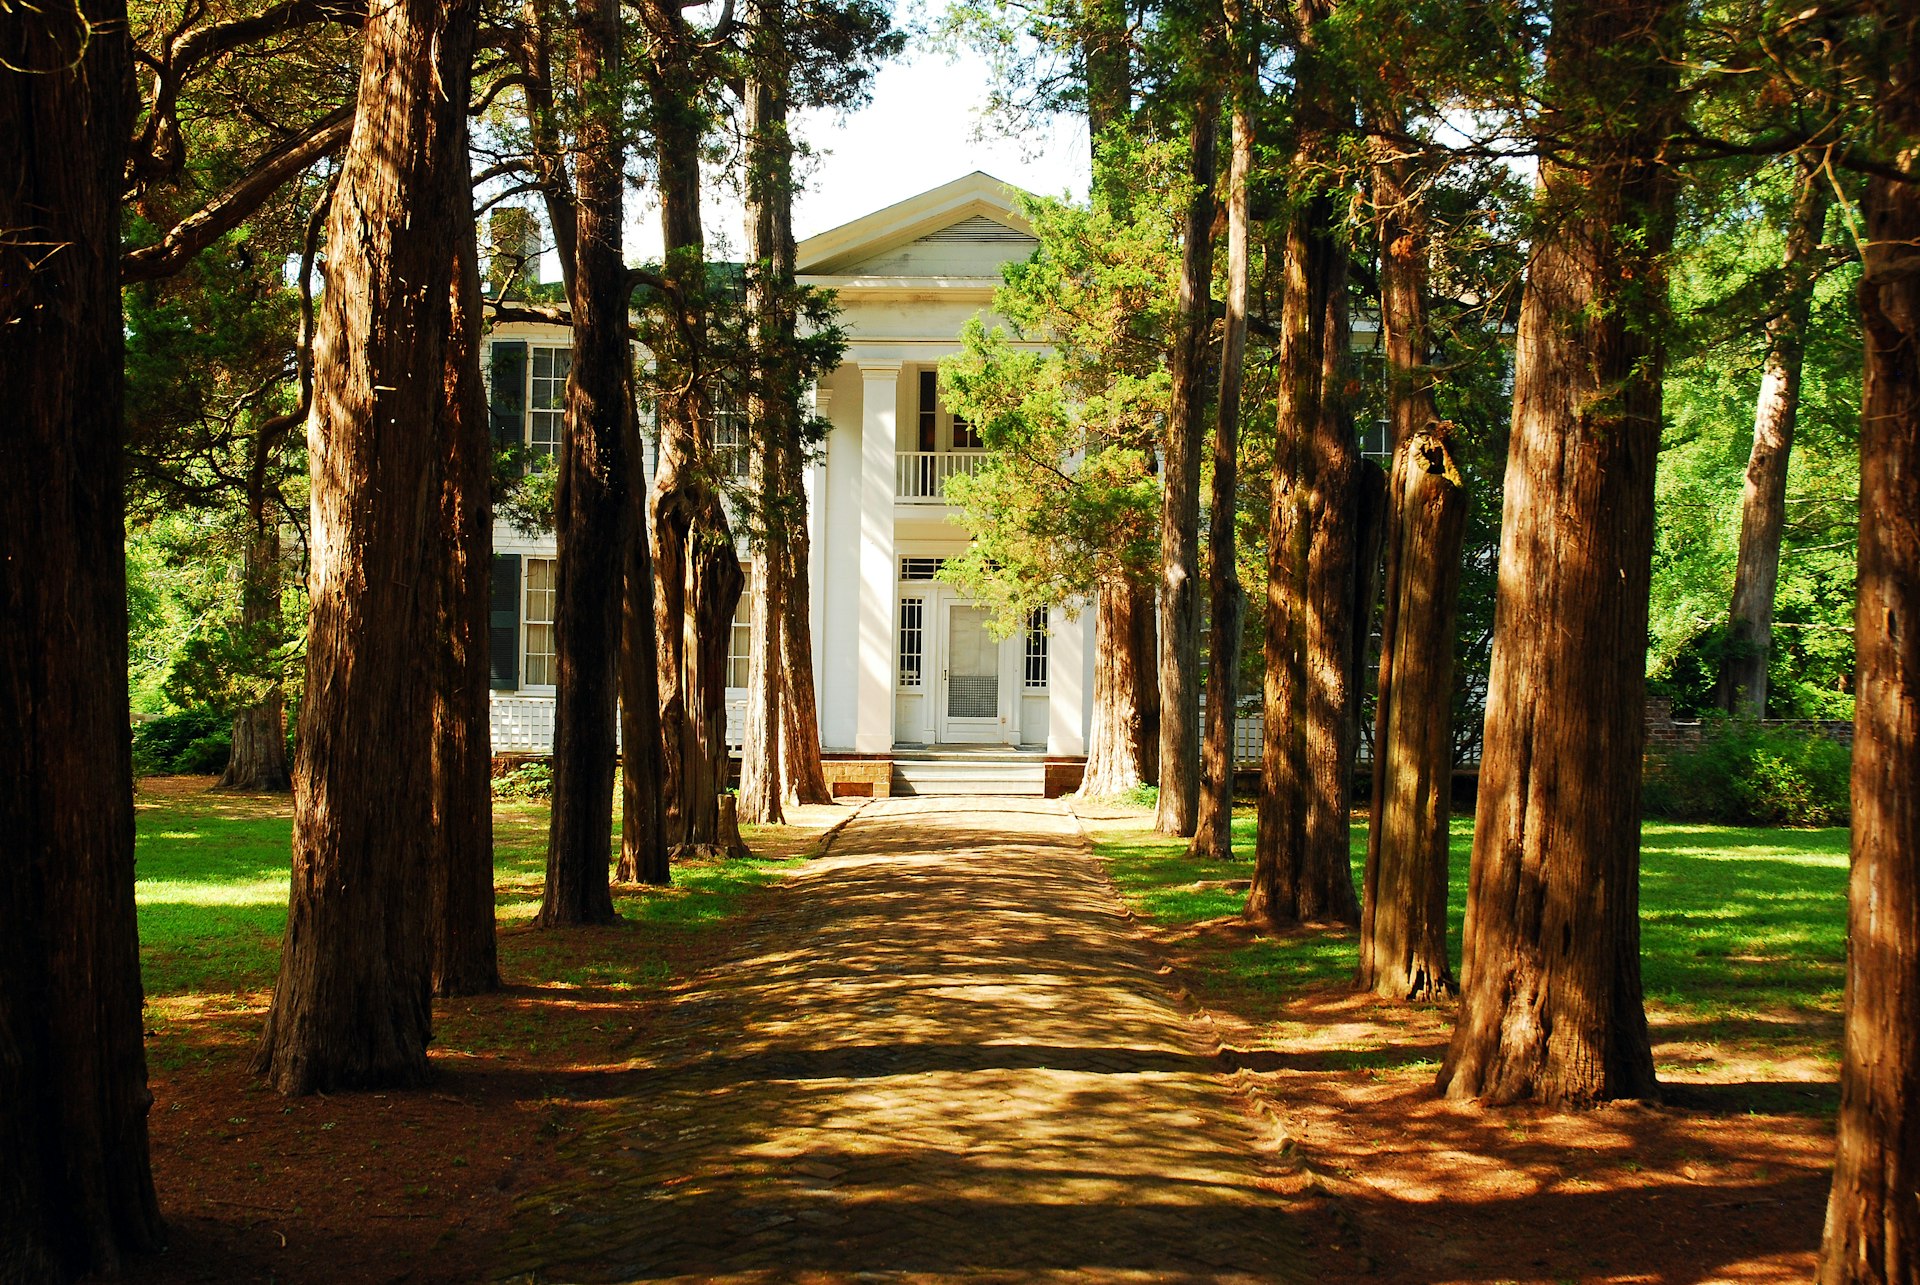 A picturesque tree-lined path leads to a large house